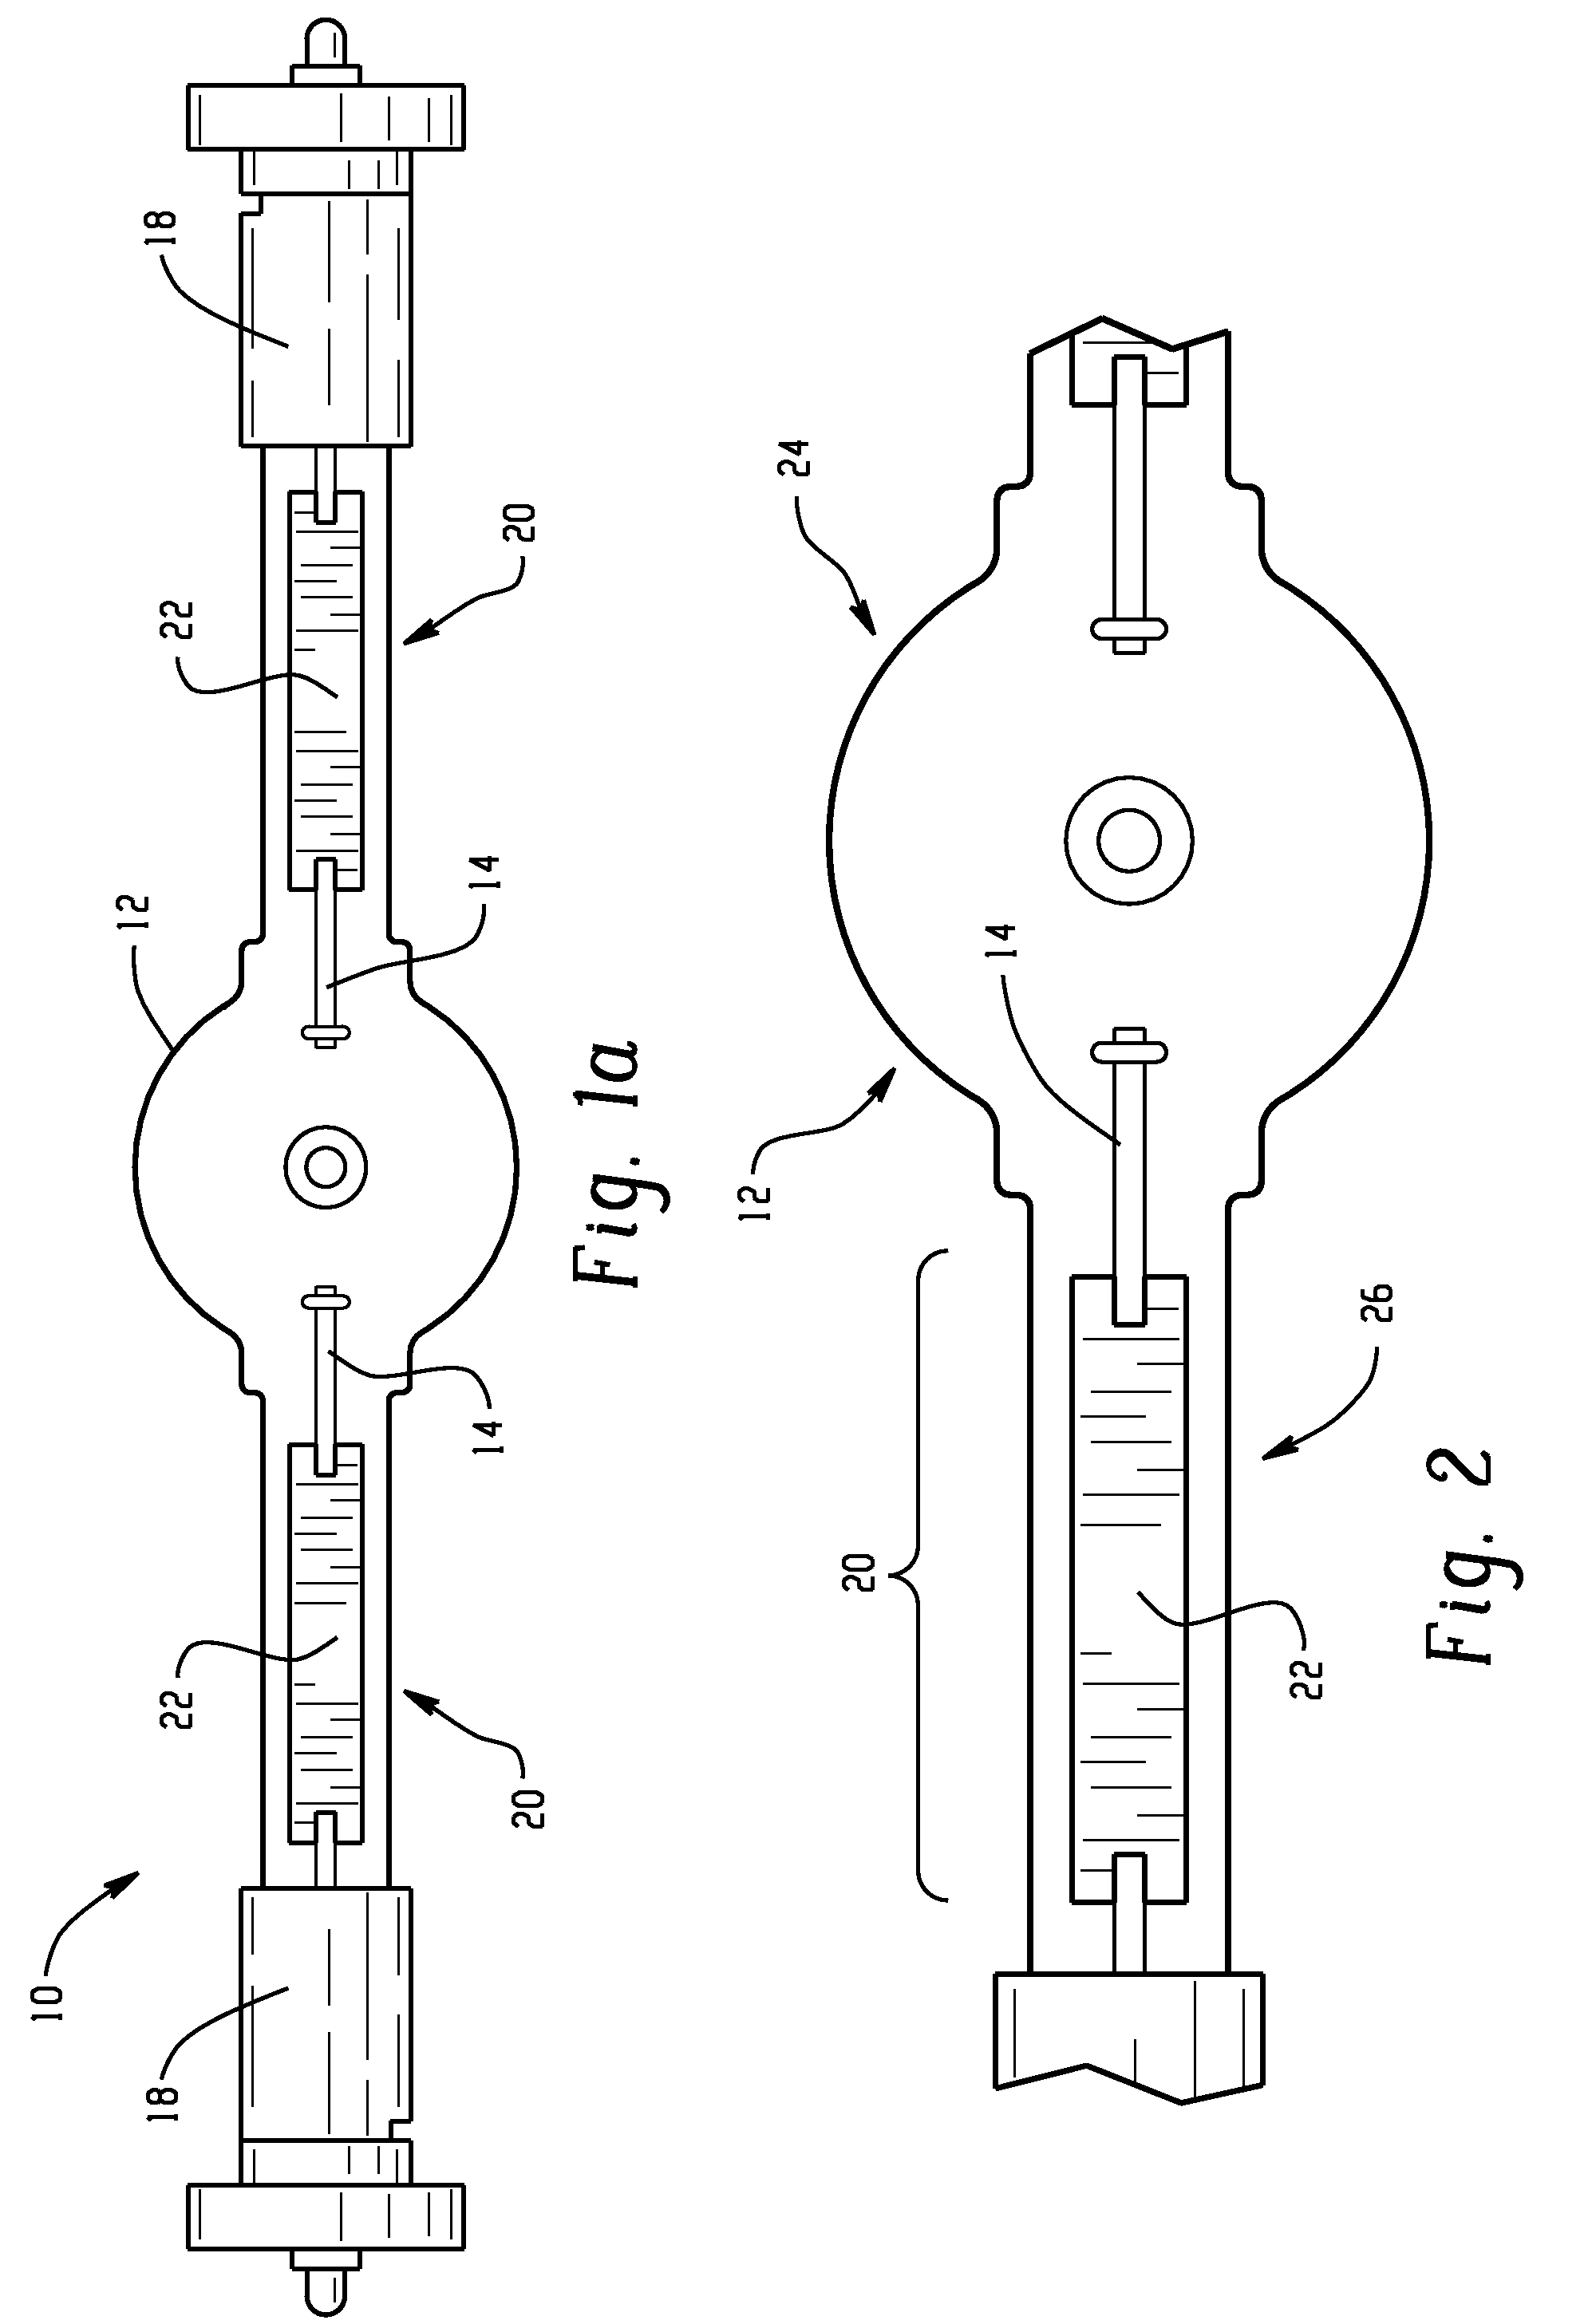 Metal and oxide interface assembly to sustain high operating temperature and reduce shaling